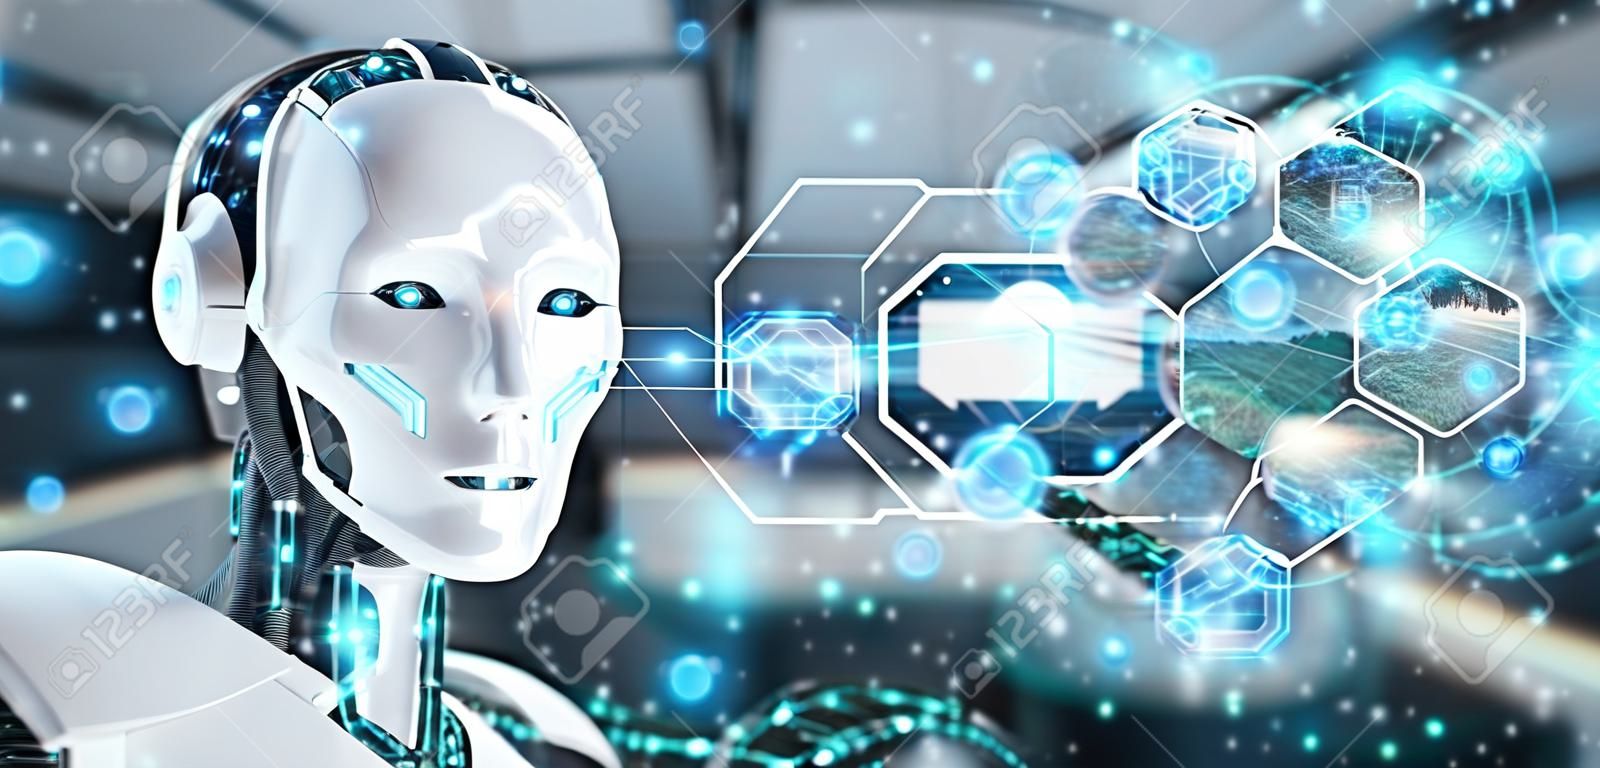 White cyborg on blurred background connecting devices together 3D rendering